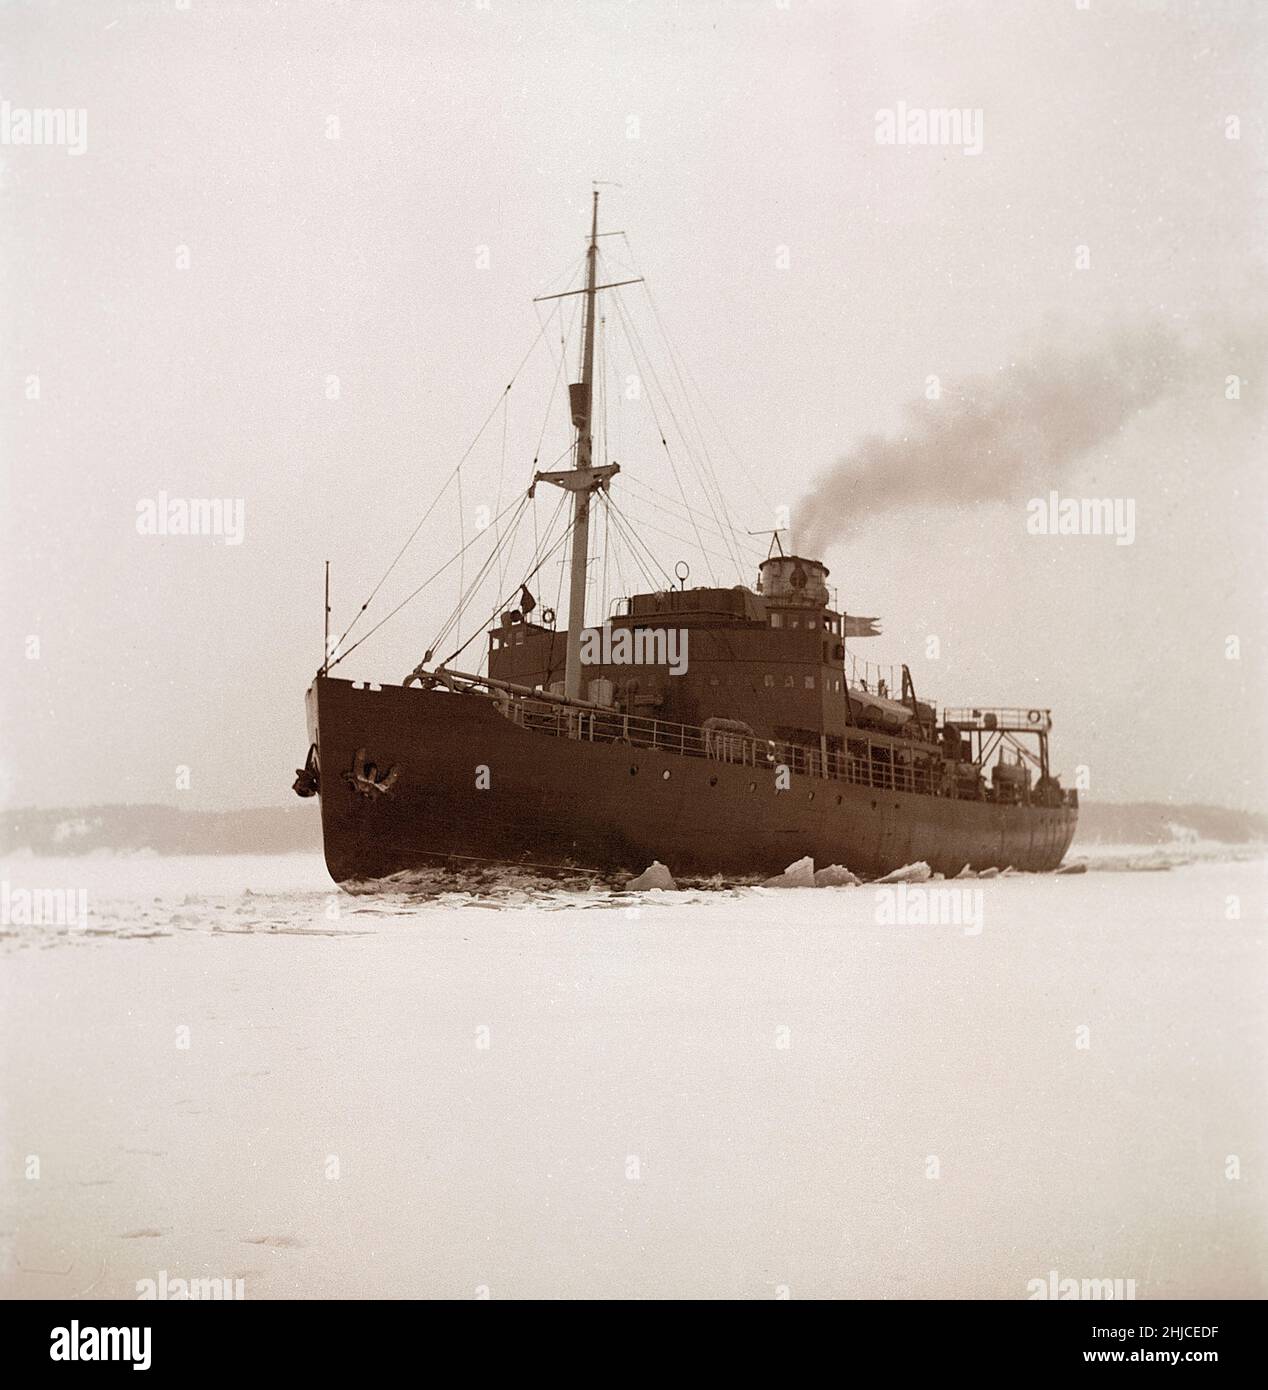 Winter at sea in the 1940s. Pictured the swedish icebreaker Ymer breaking the ice in the inner waters at the swedish coast in febrary 1941. The icebreaker Ymer was built in Malmö 1931-1933 and served as a state icebreaker for 44 years until she was sold and scrapped 1976. The winters during the World war II was often exceptionally cold and the ice became a big problem for the shipping industry and for the military.  Sweden 1942 Kristoffersson ref 172-5 Stock Photo